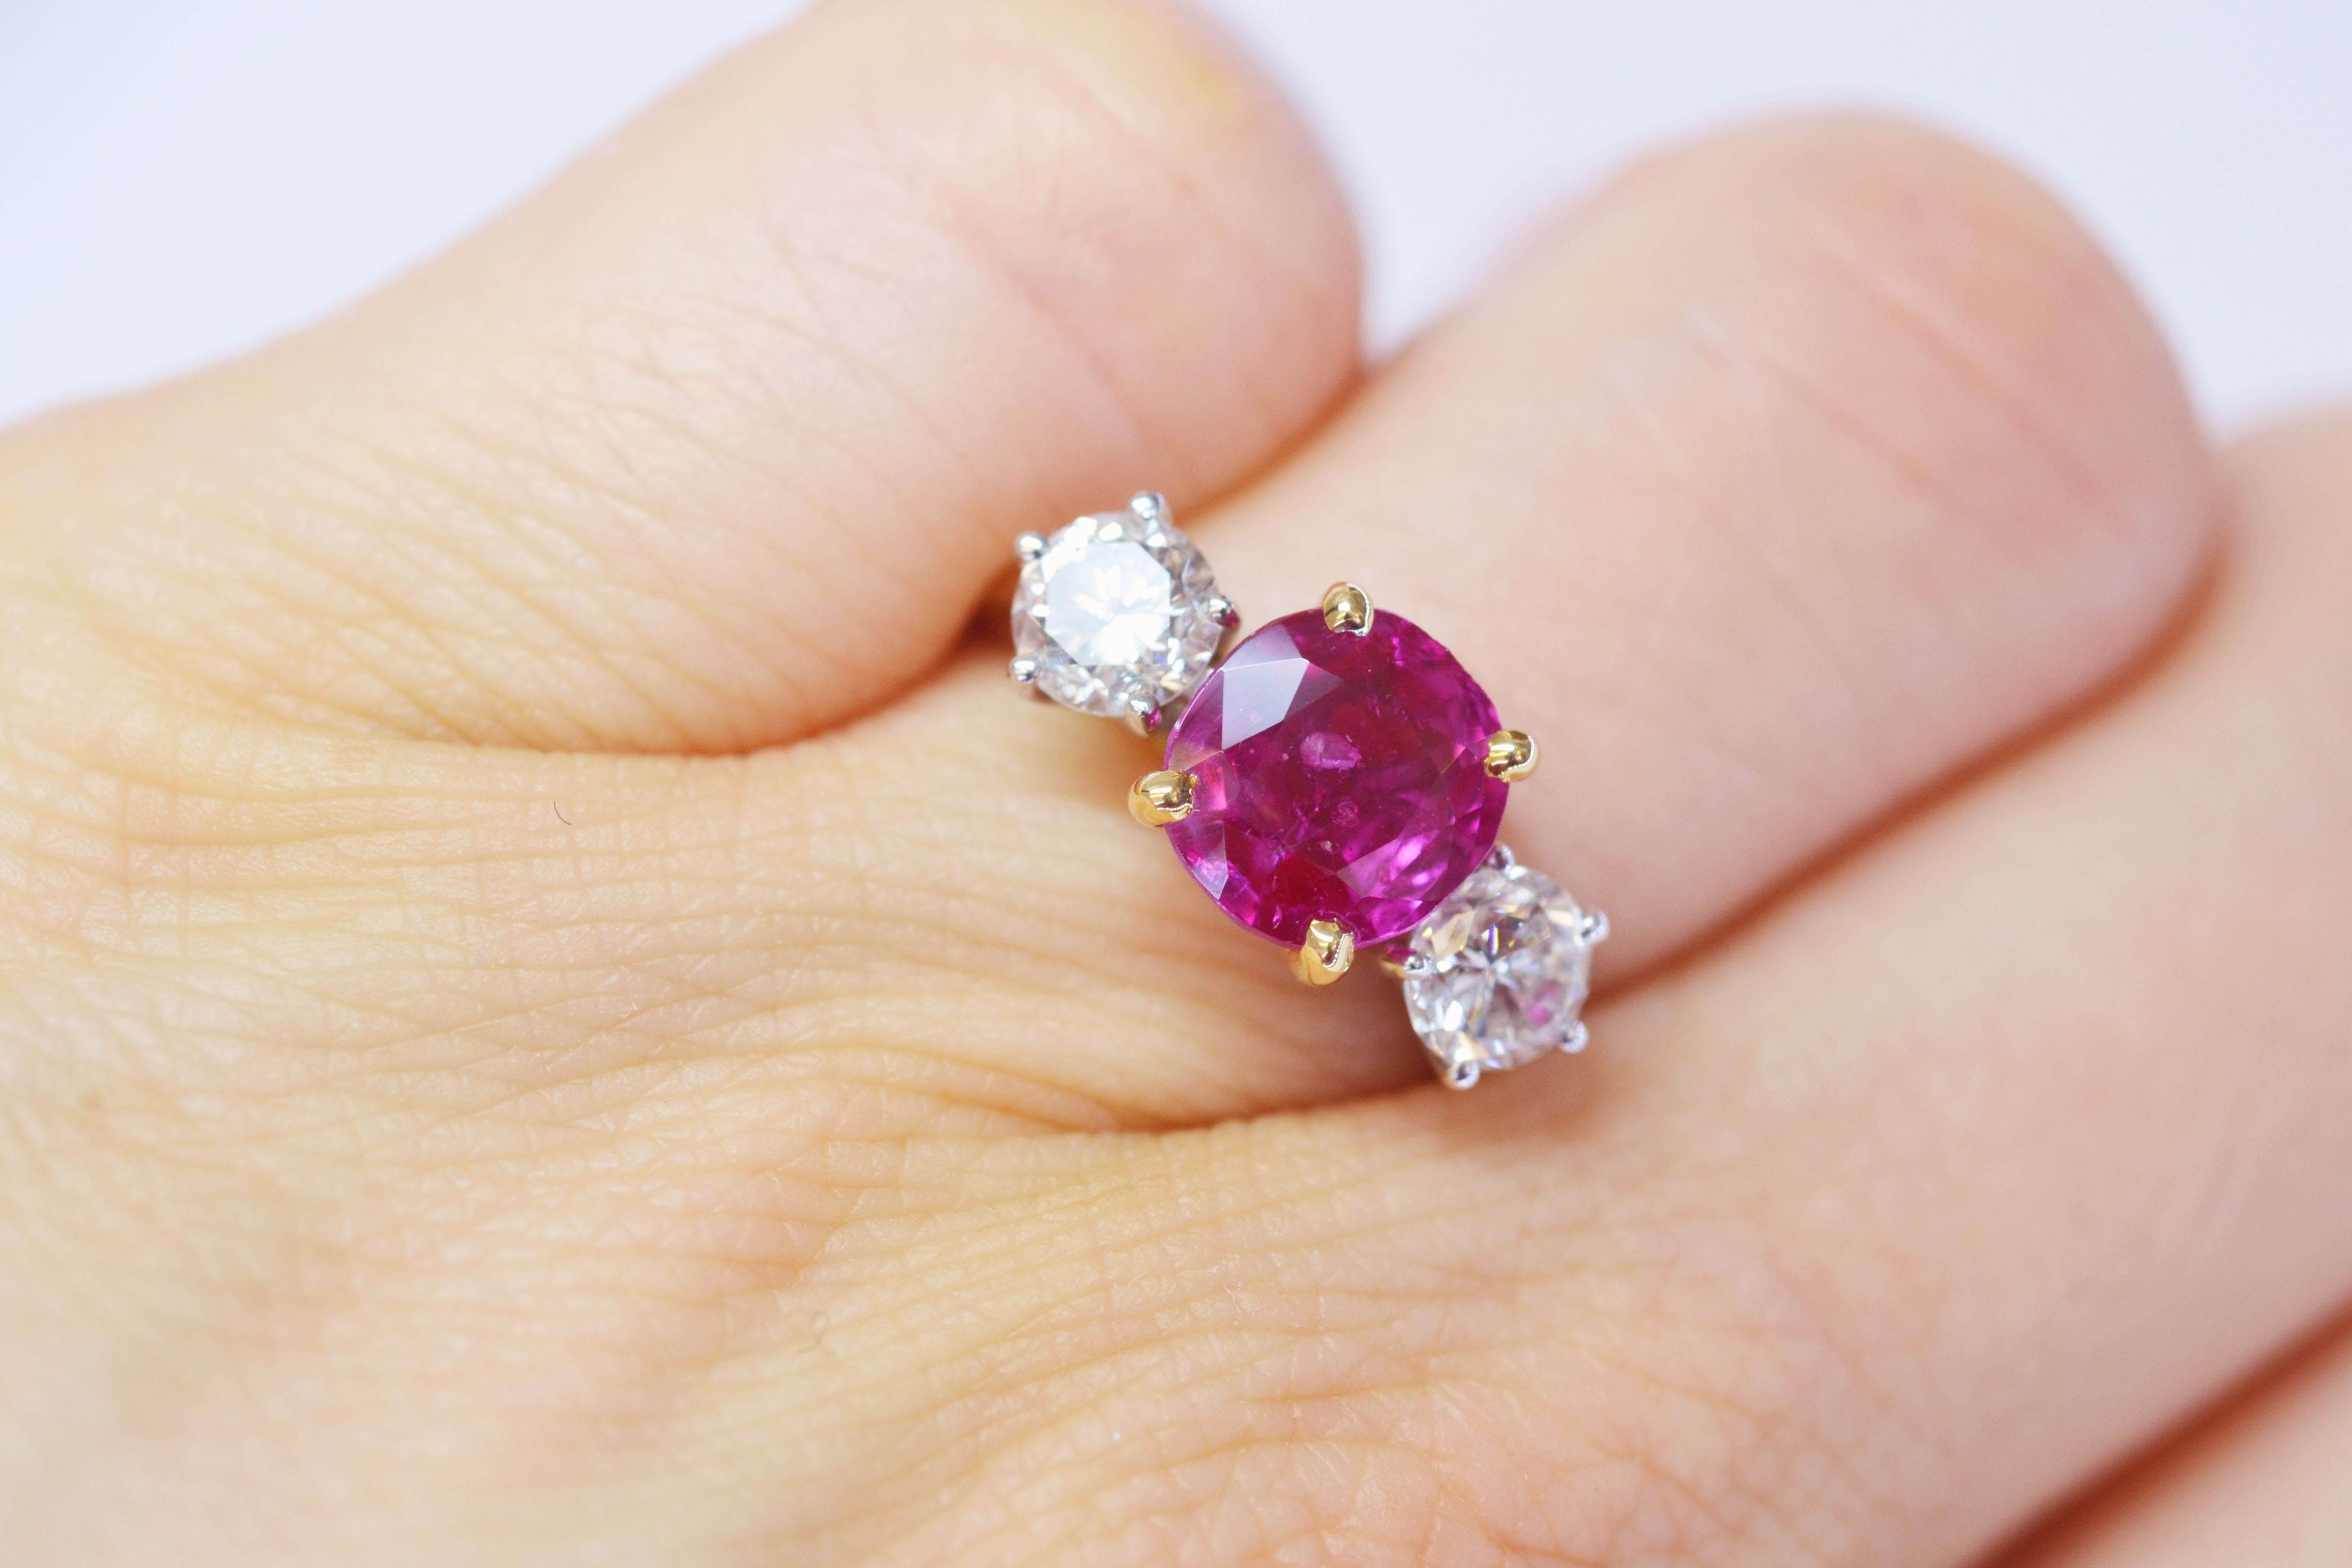 Handcrafted ring in 18k yellow gold with a vibrant 2.50 carat pinkish ruby between two glittering diamonds. This ring has an open basket setting which lets the light come through from every angle, illuminating the beauty of the three stones. 

Ring